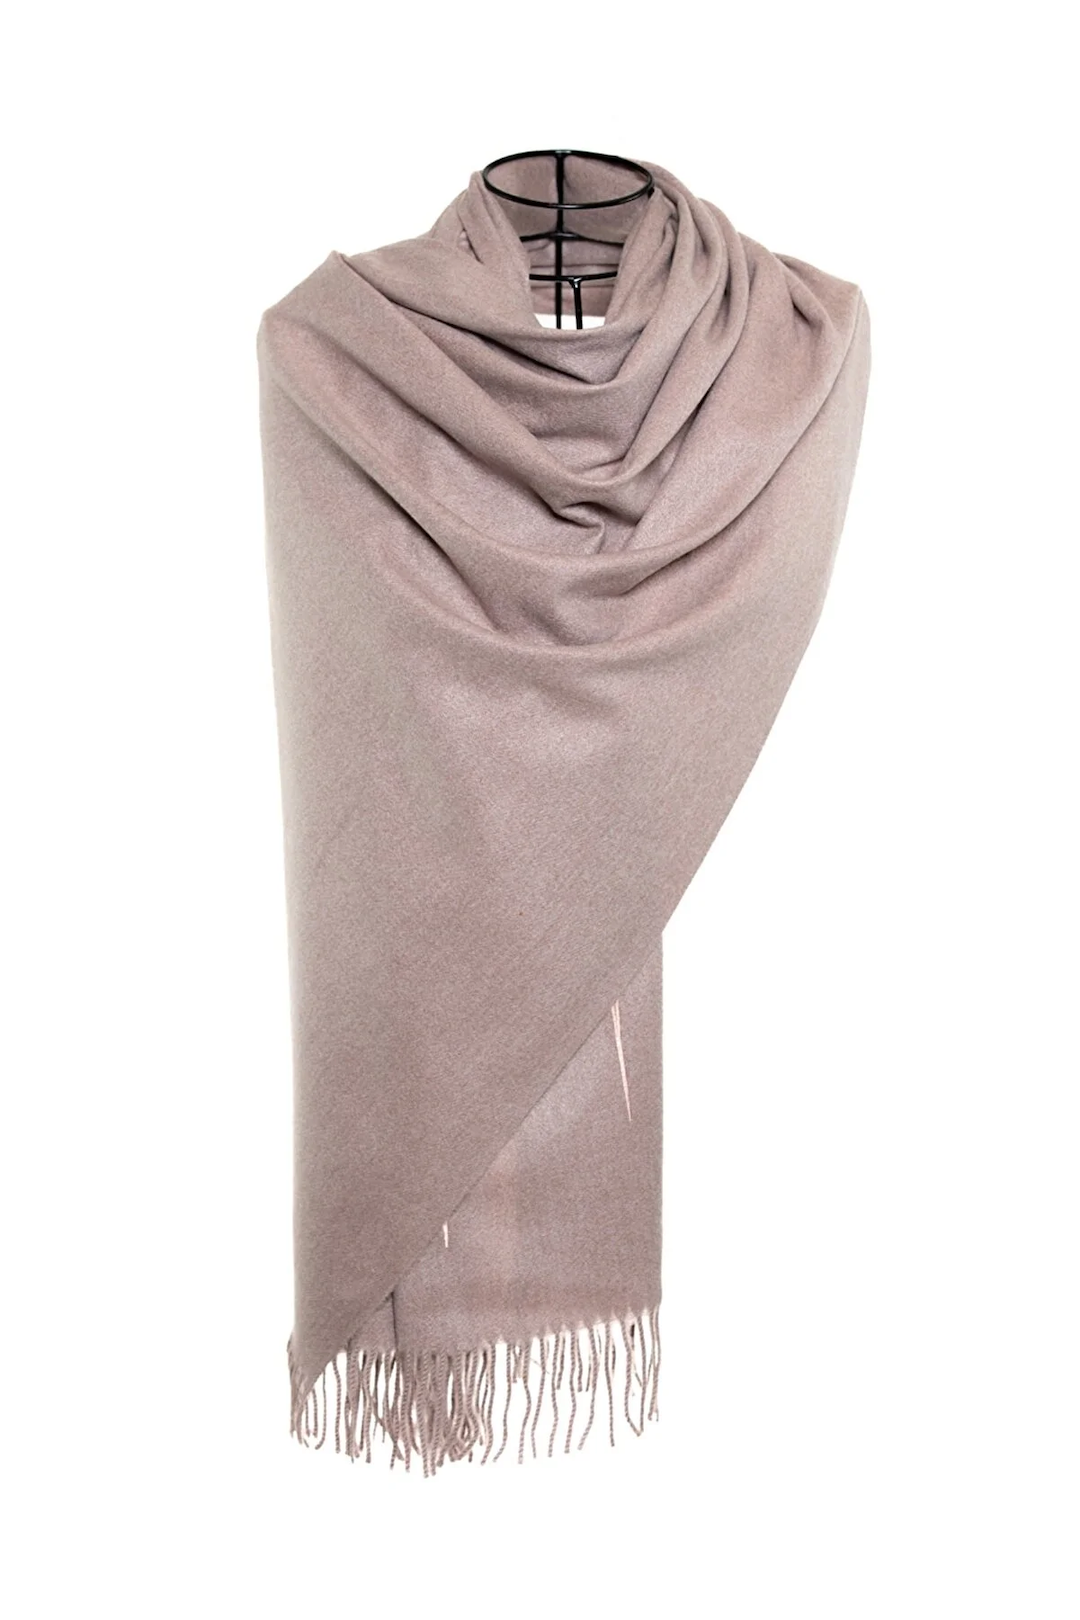 Heart Beat Embroidered Shawl with Faux Fur Pon Pons - Sepia